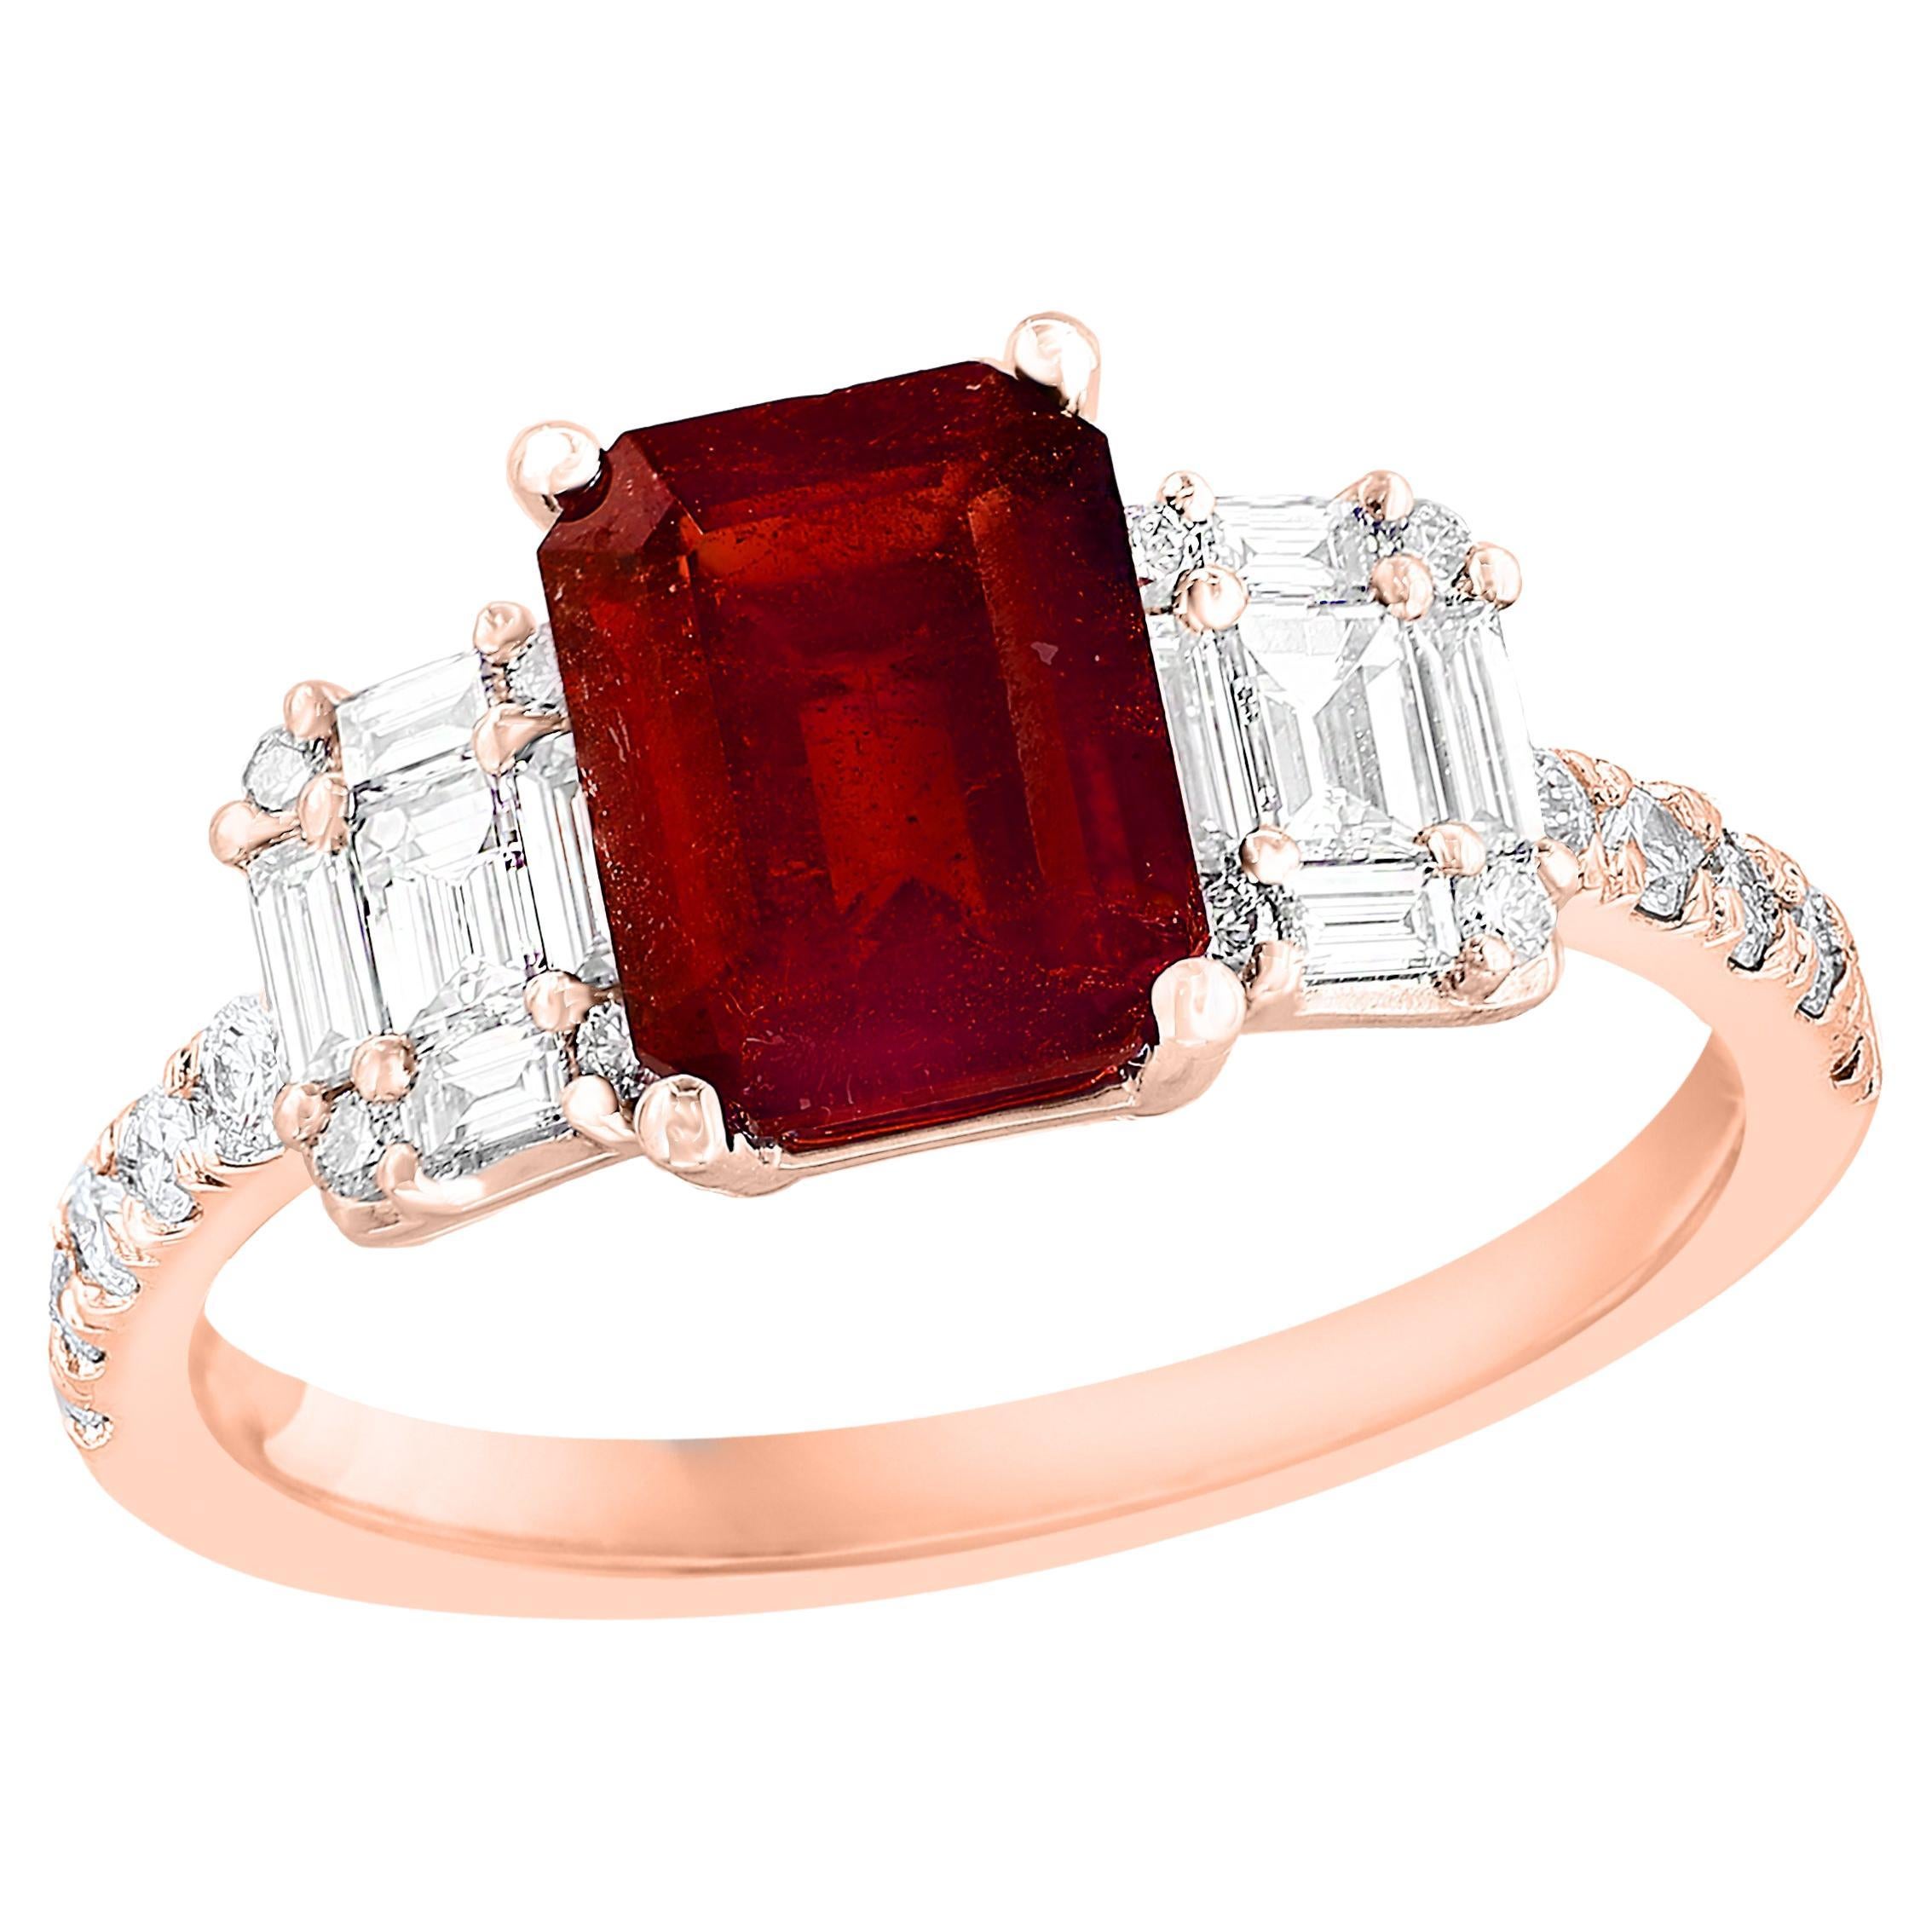 1.87 Carat Emerald Cut Ruby and Diamond Ring in 18k Rose Gold For Sale